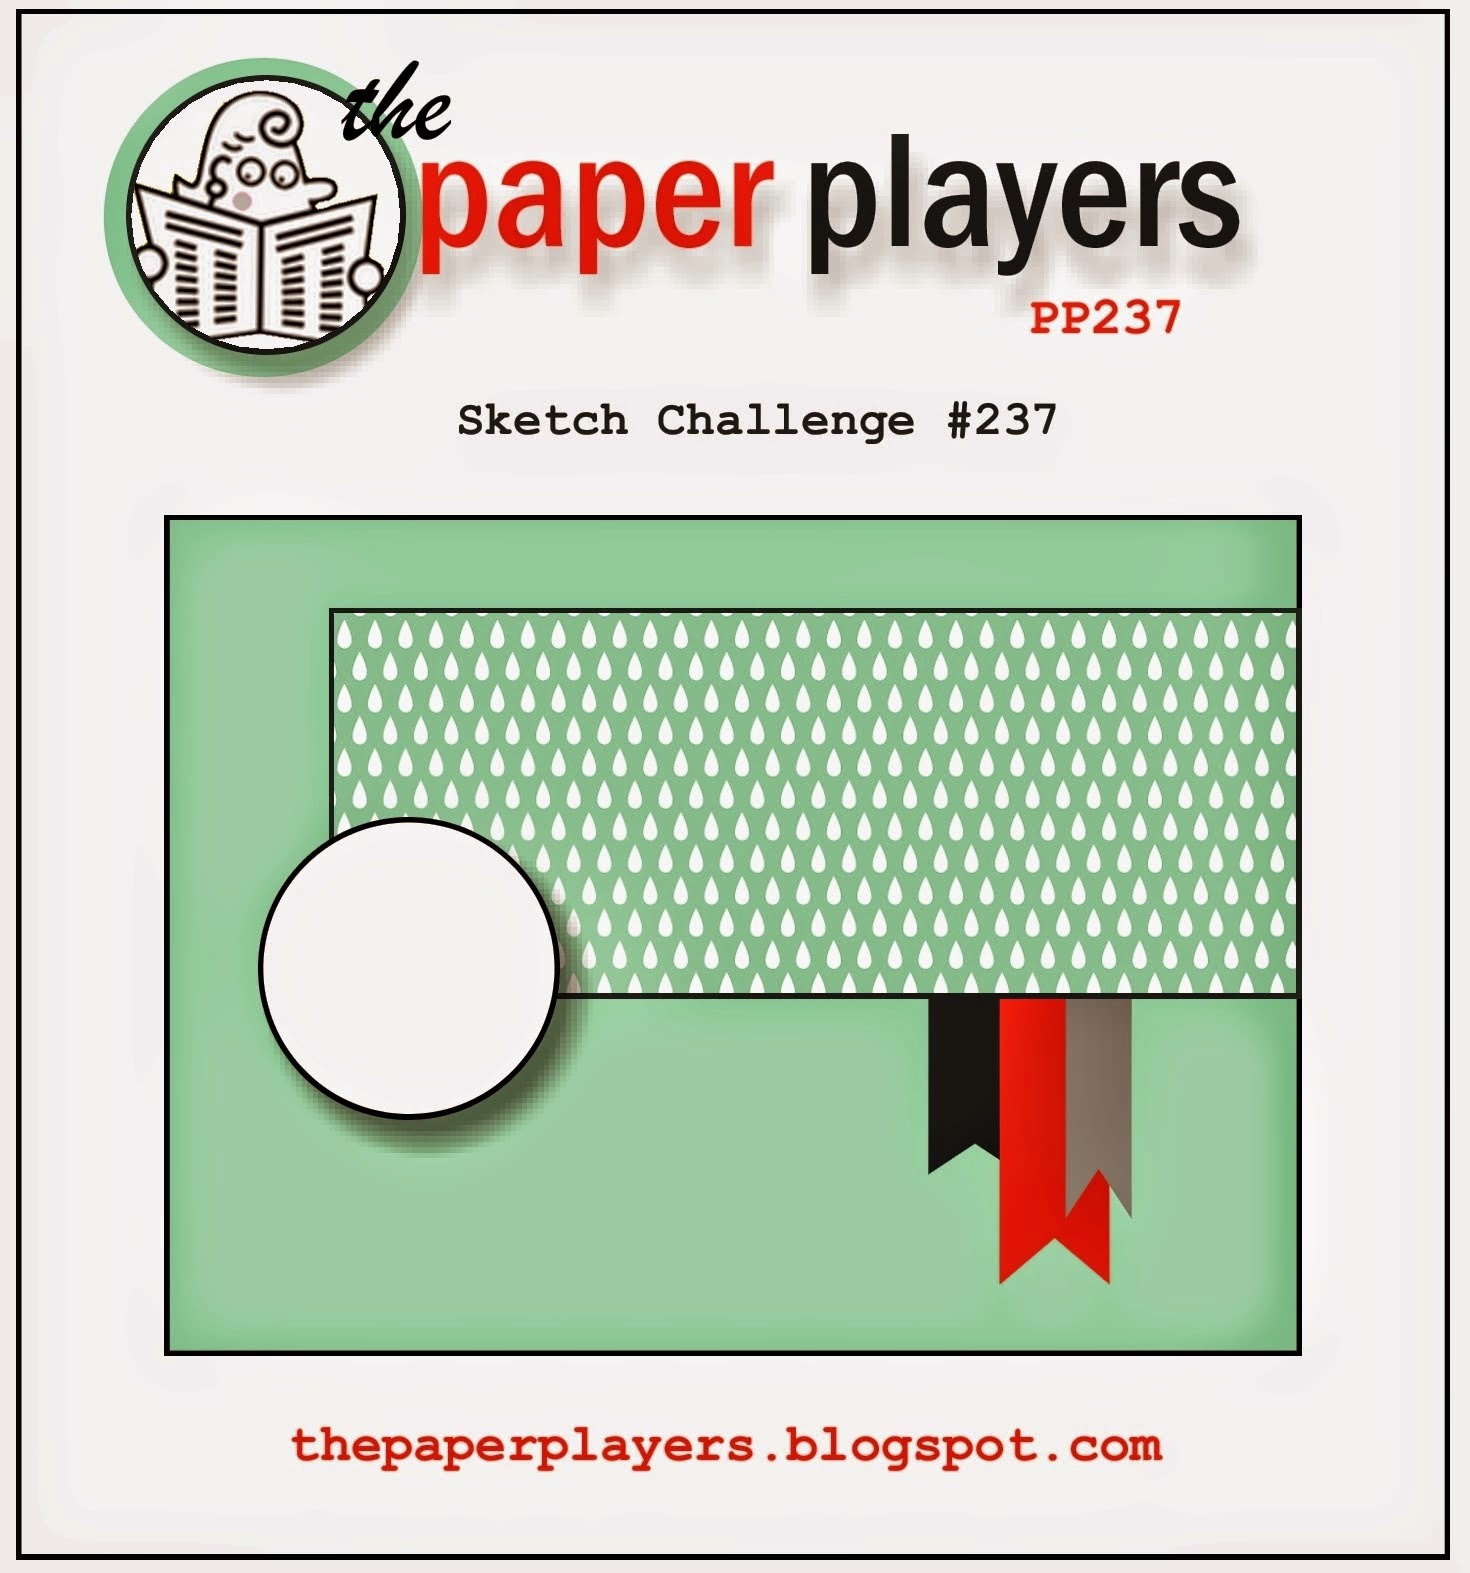 Play Template. Paper plays